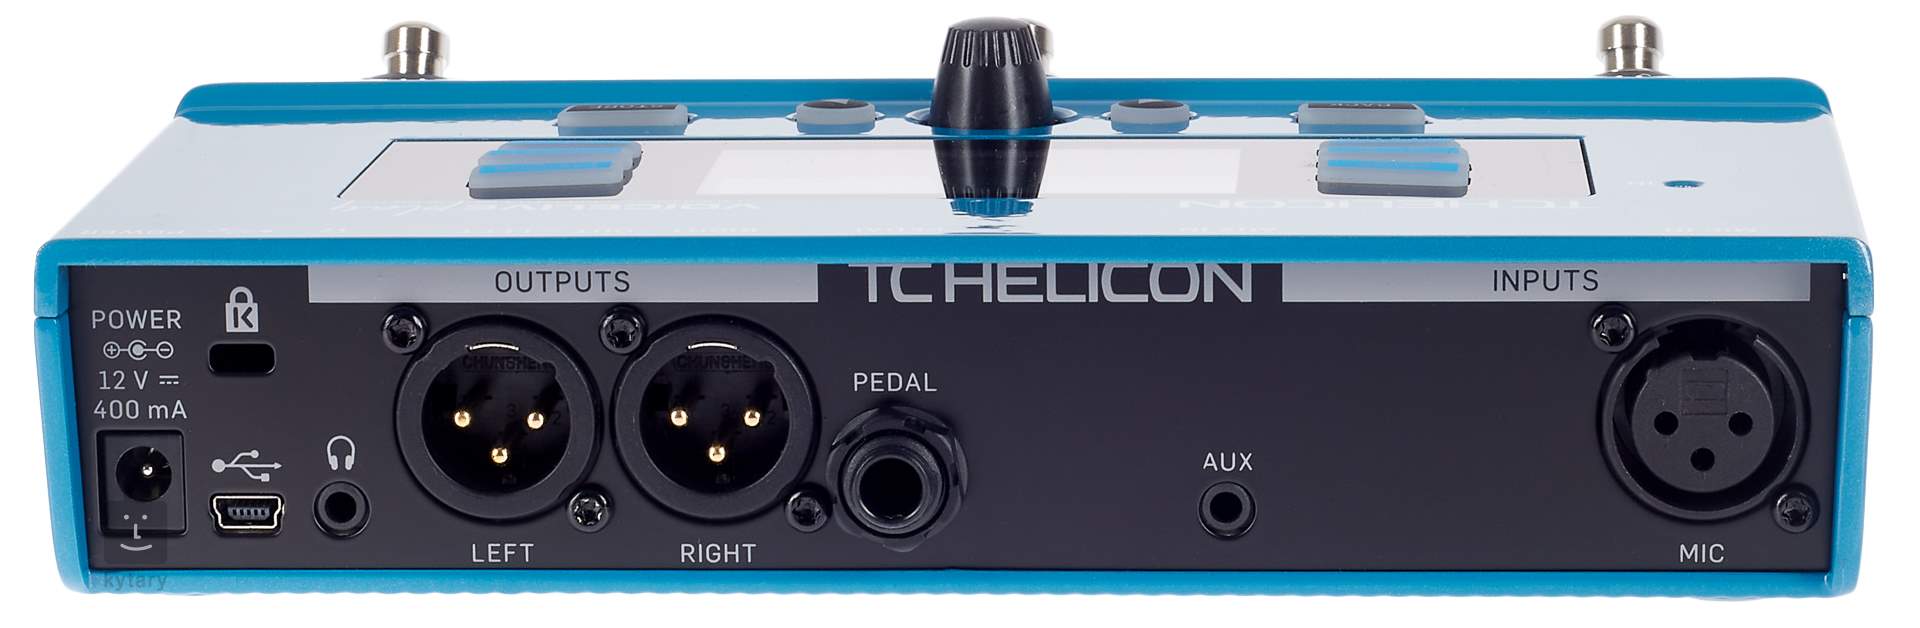 TC-HELICON Voicelive PLAY